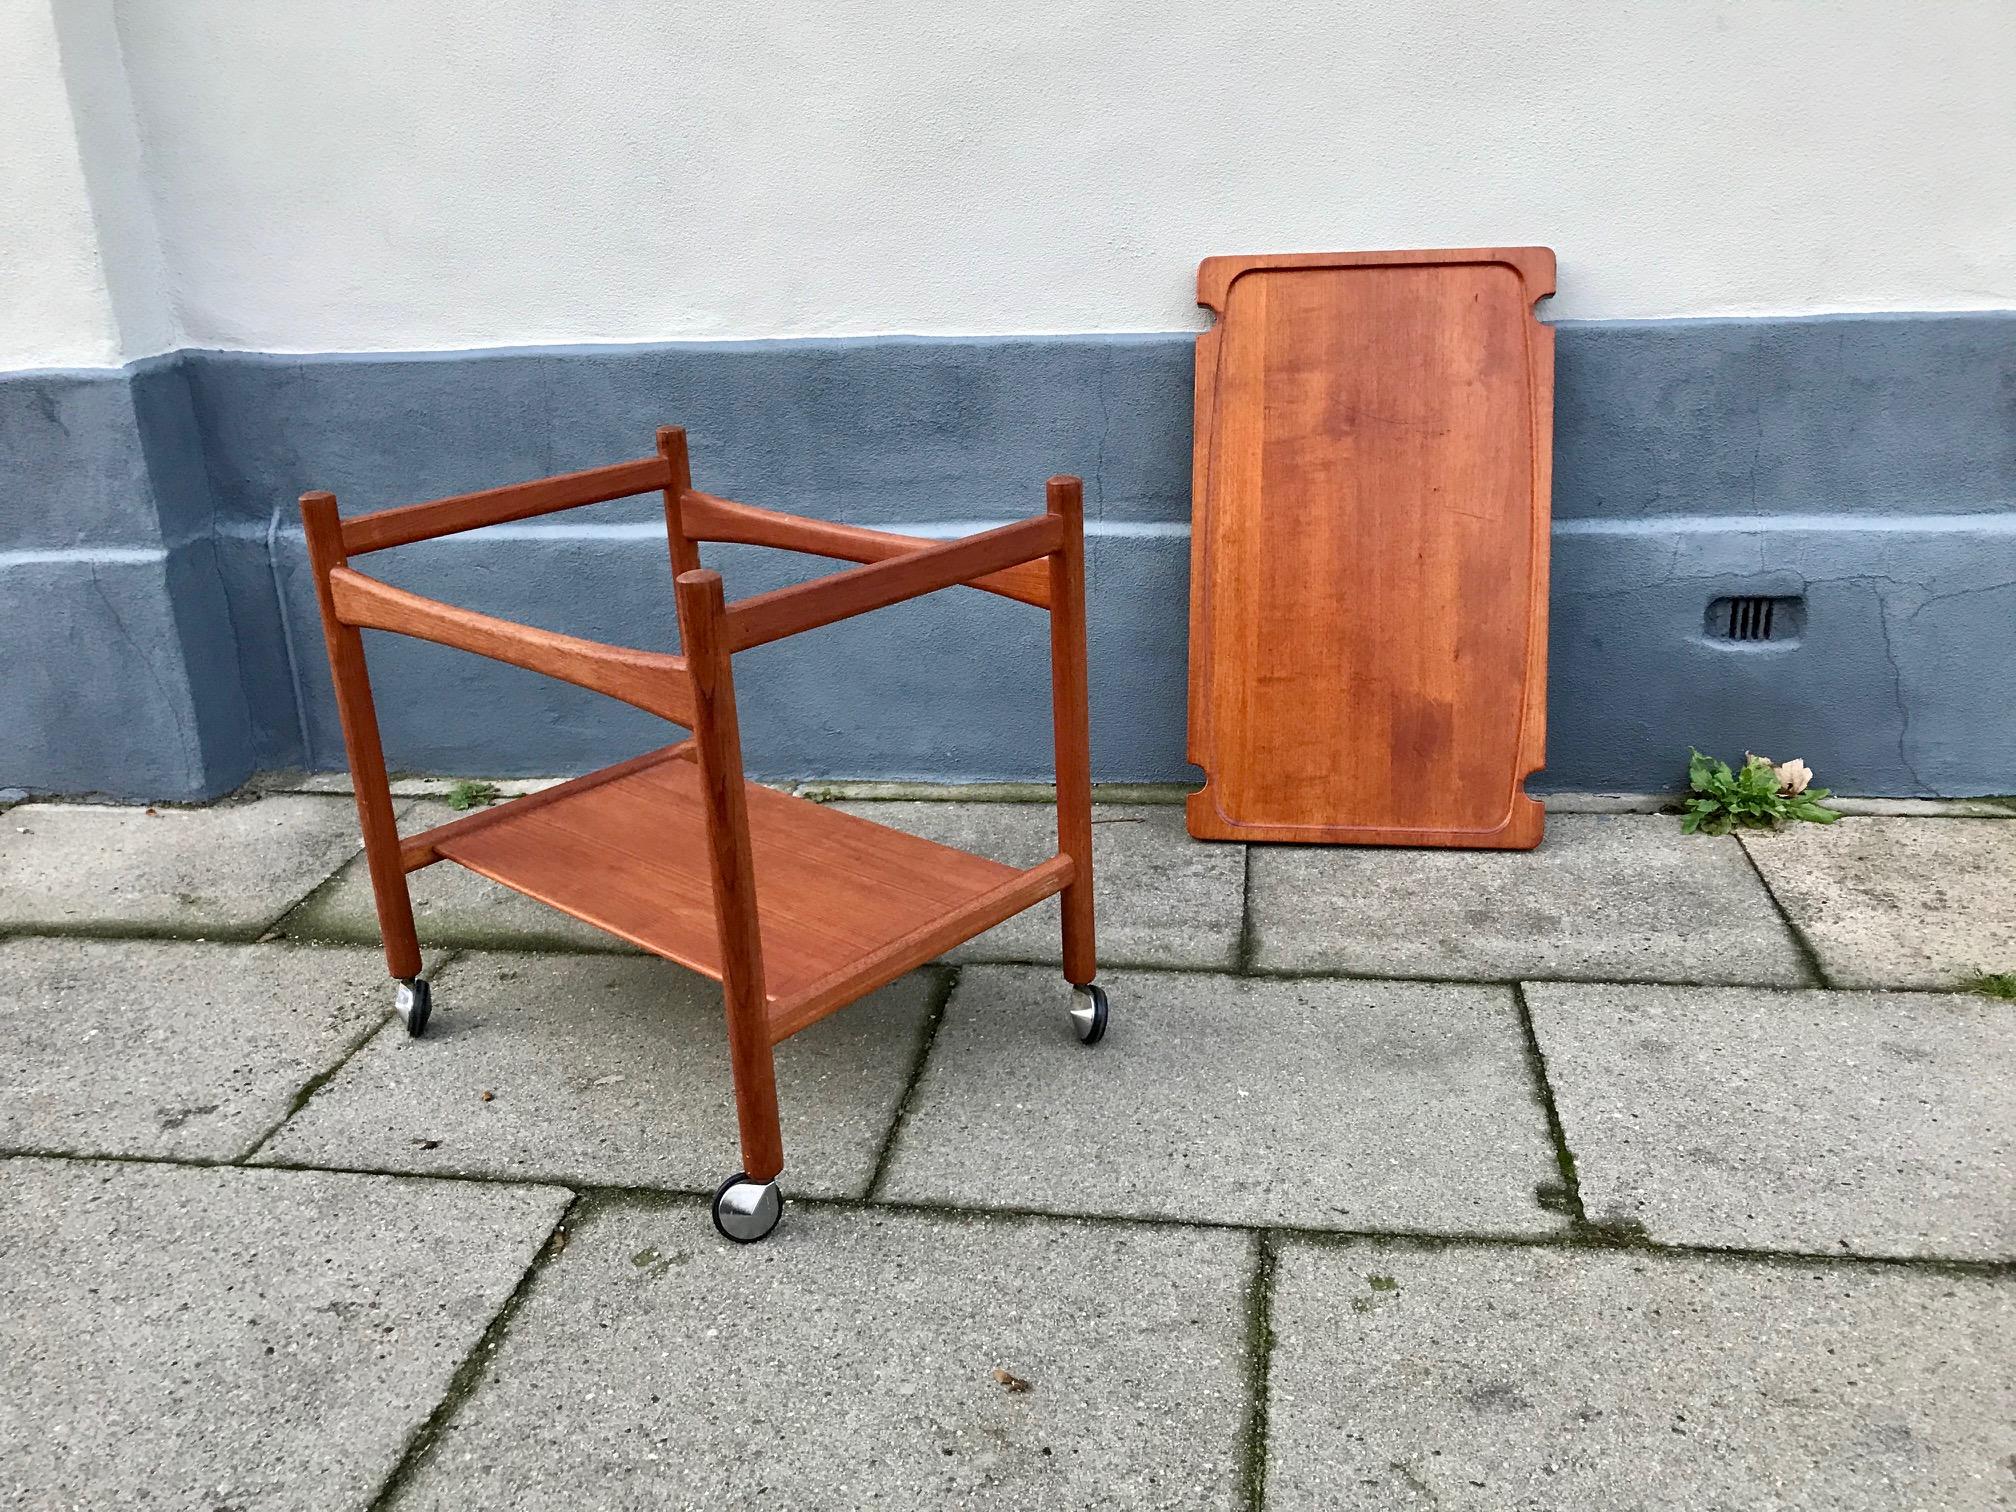 Hans Jørgen Wegner bar, serving cart with removable tray. Made in Denmark by PP Møbler. All original condition - no restorations. Lovely golden patina and lighter signs of ware. The tray top is solid teak, removable and finished on both sides.